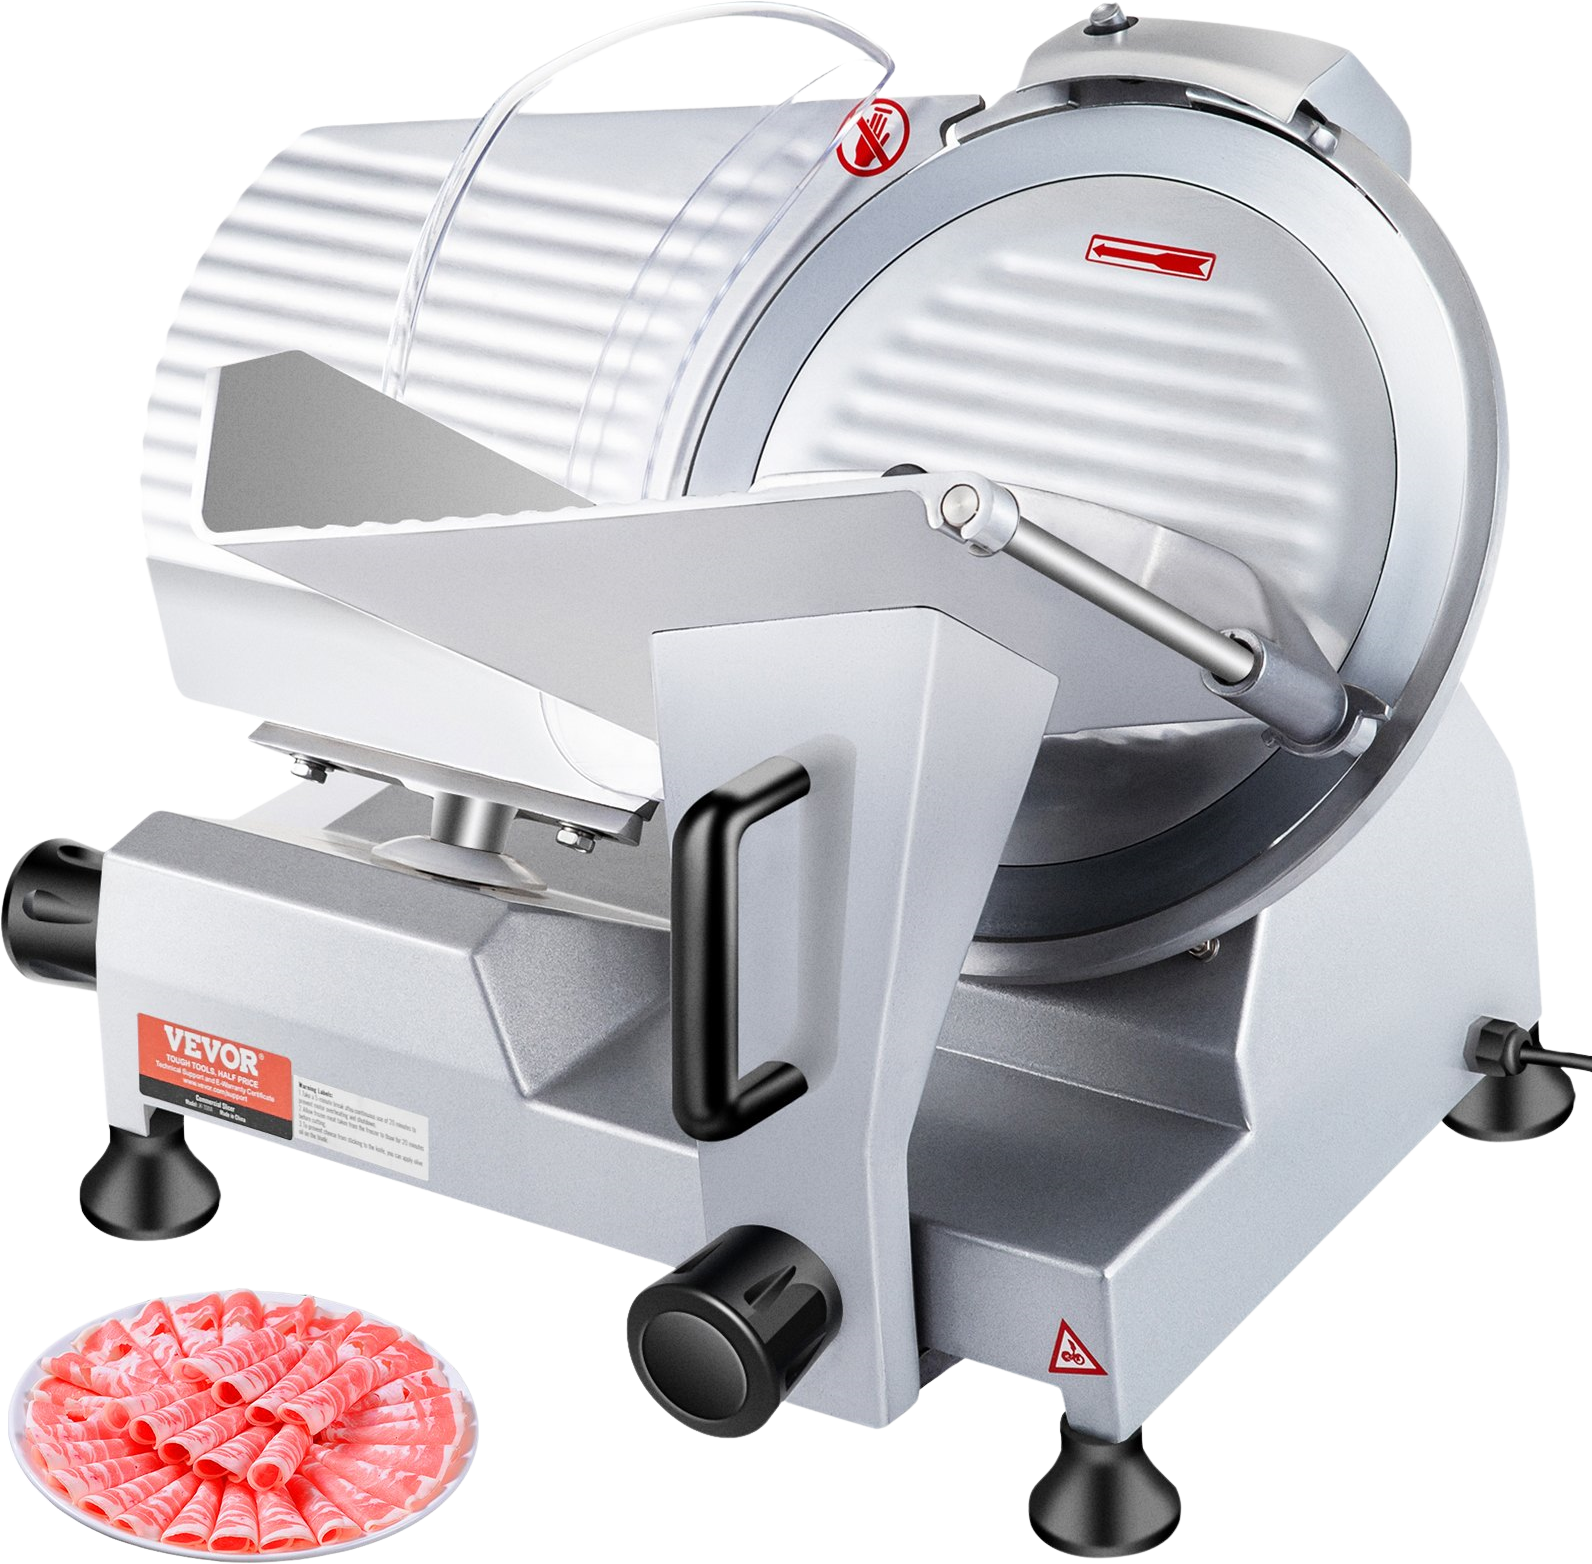 Vevor Commercial Meat Slicer Semi-Auto 240W Electric 10